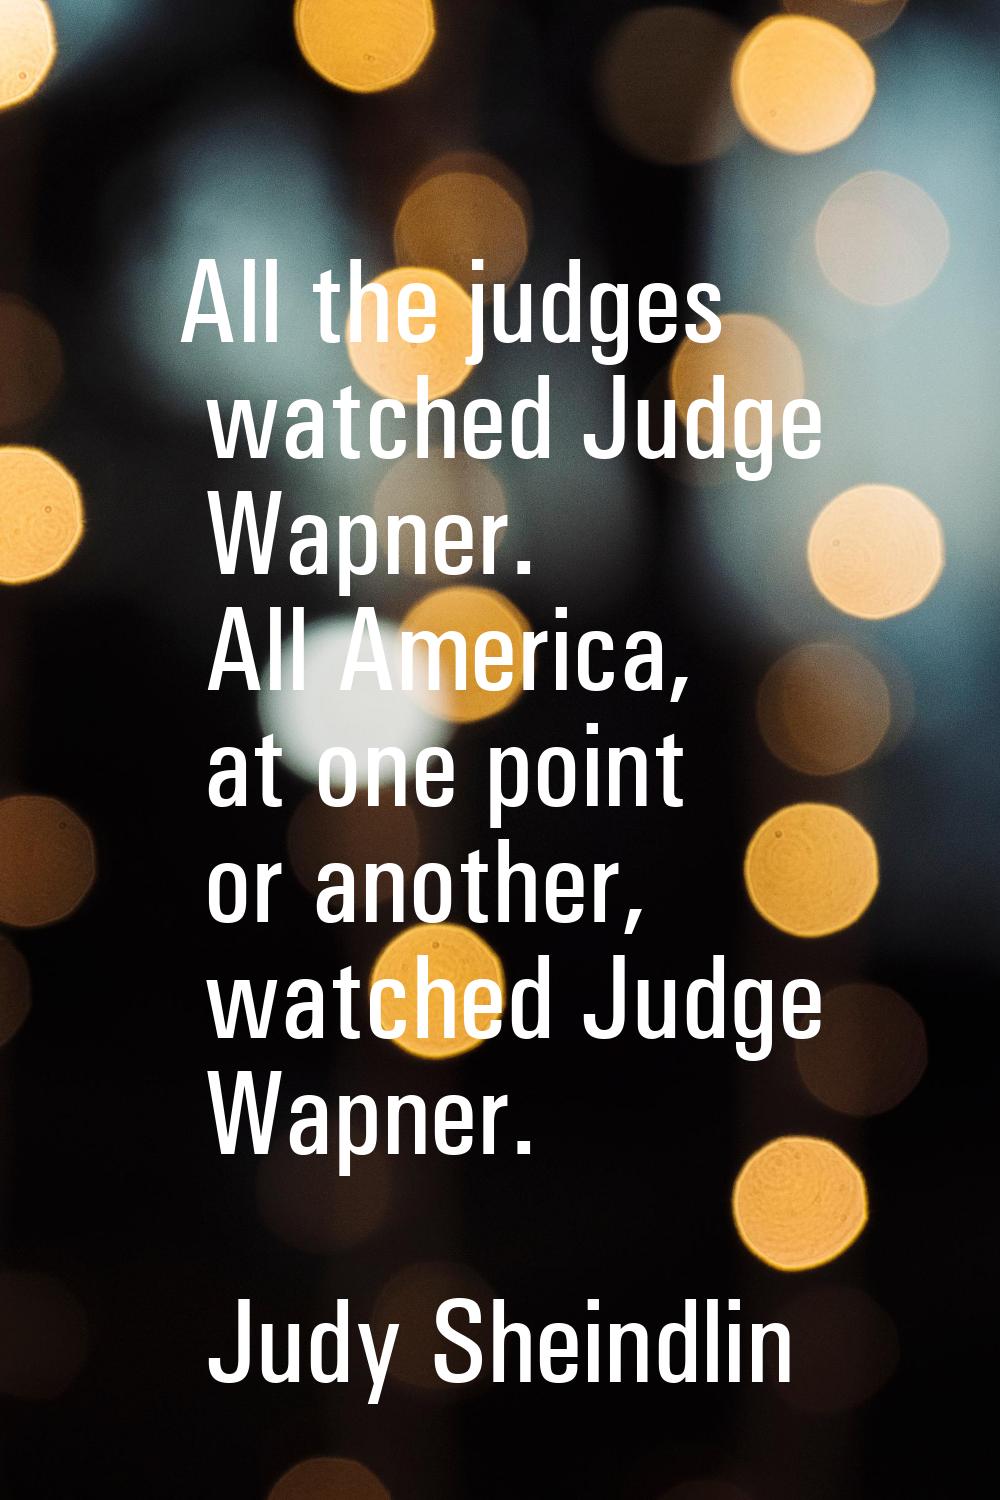 All the judges watched Judge Wapner. All America, at one point or another, watched Judge Wapner.